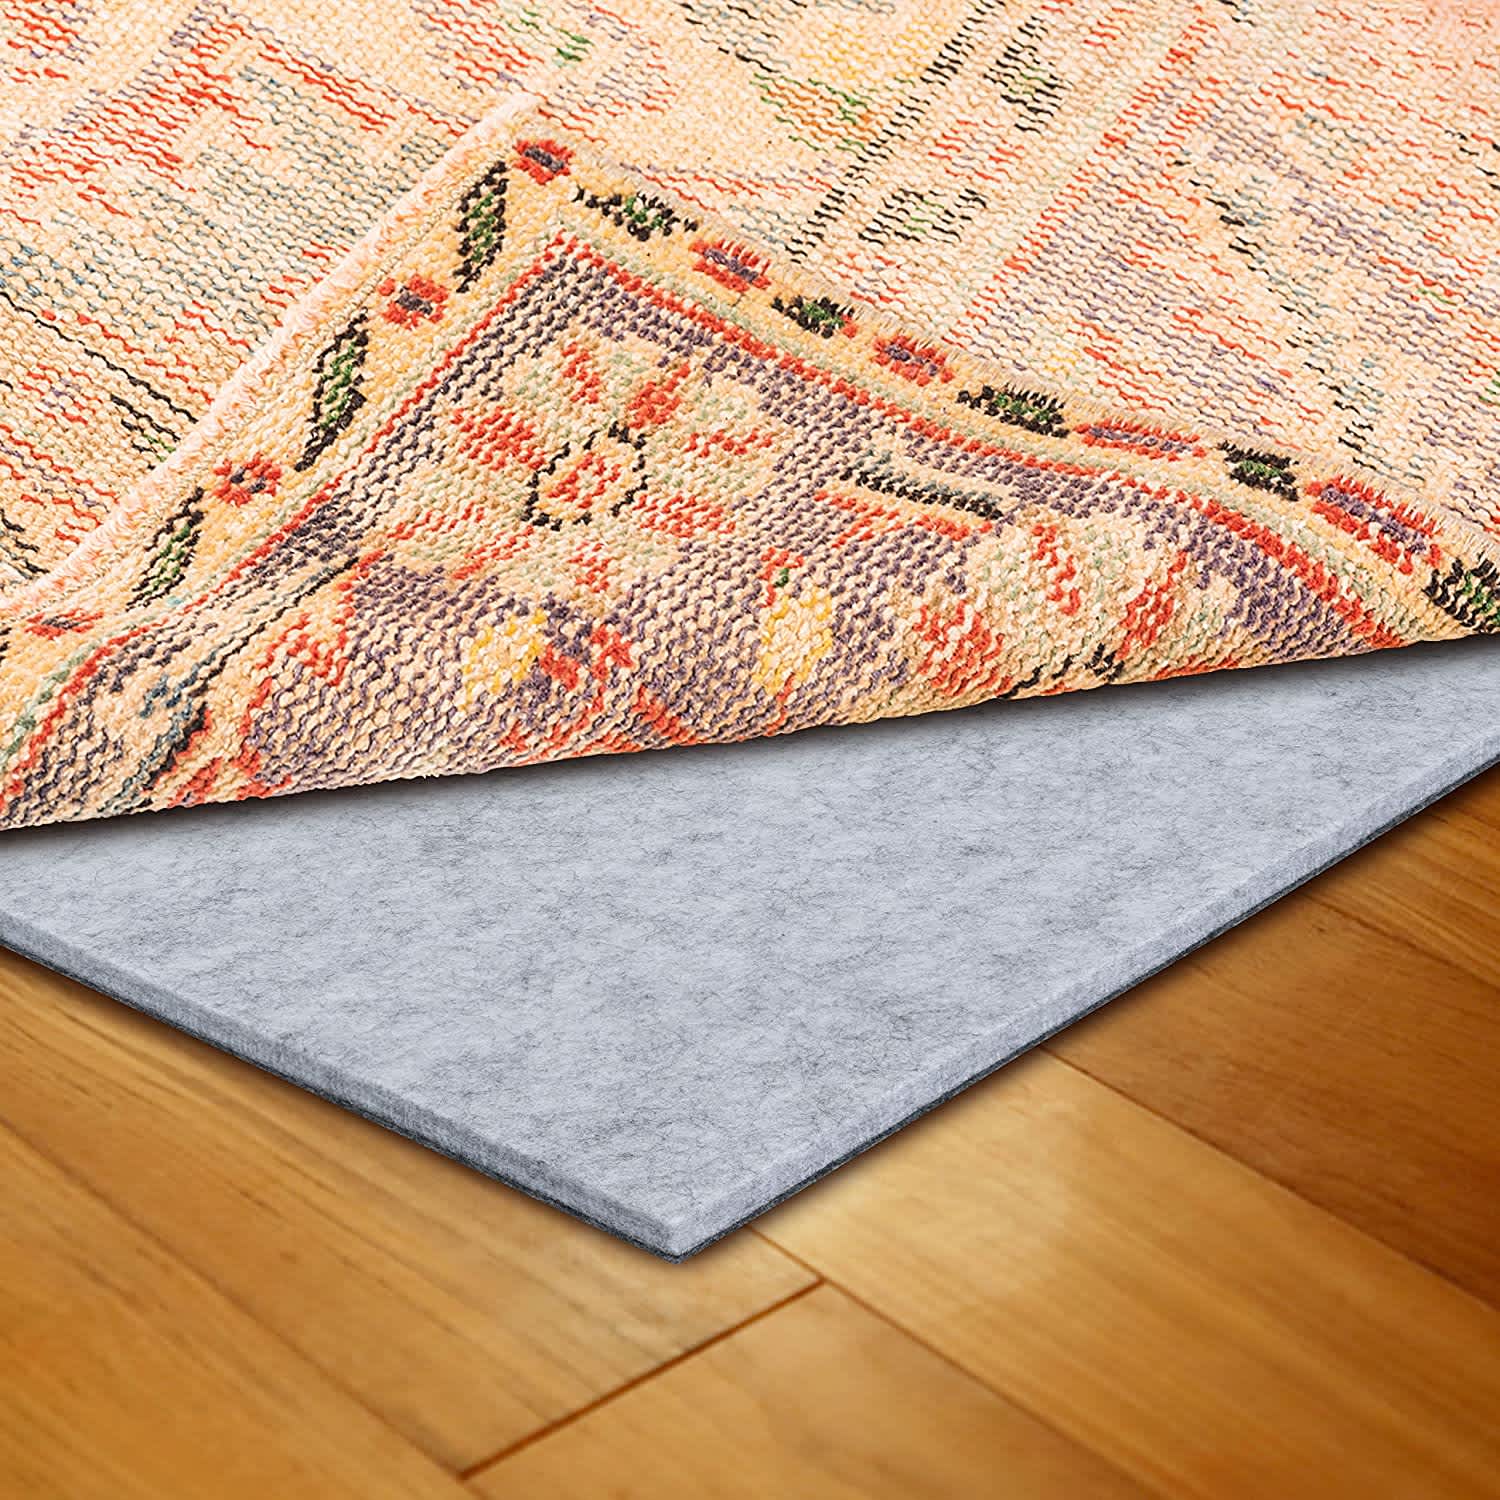 The 10 Best Rug Pads of 2023